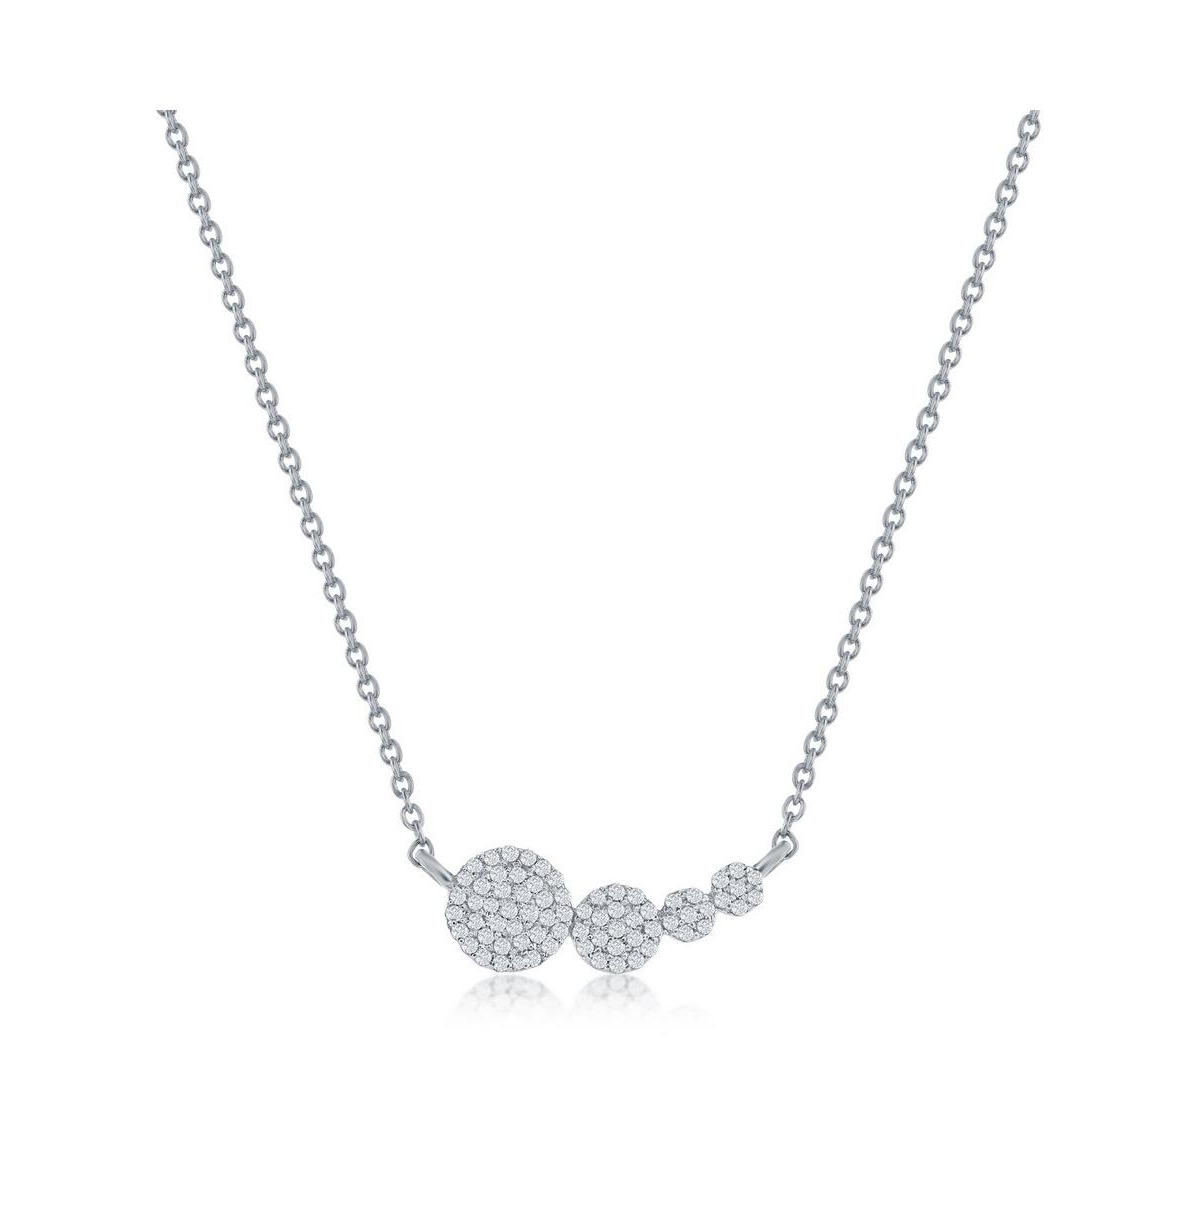 SIMONA GRADUATING ROUNDS DIAMOND NECKLACE (0.25 CT. T.W.) - 71 STONES IN STERLING SILVER